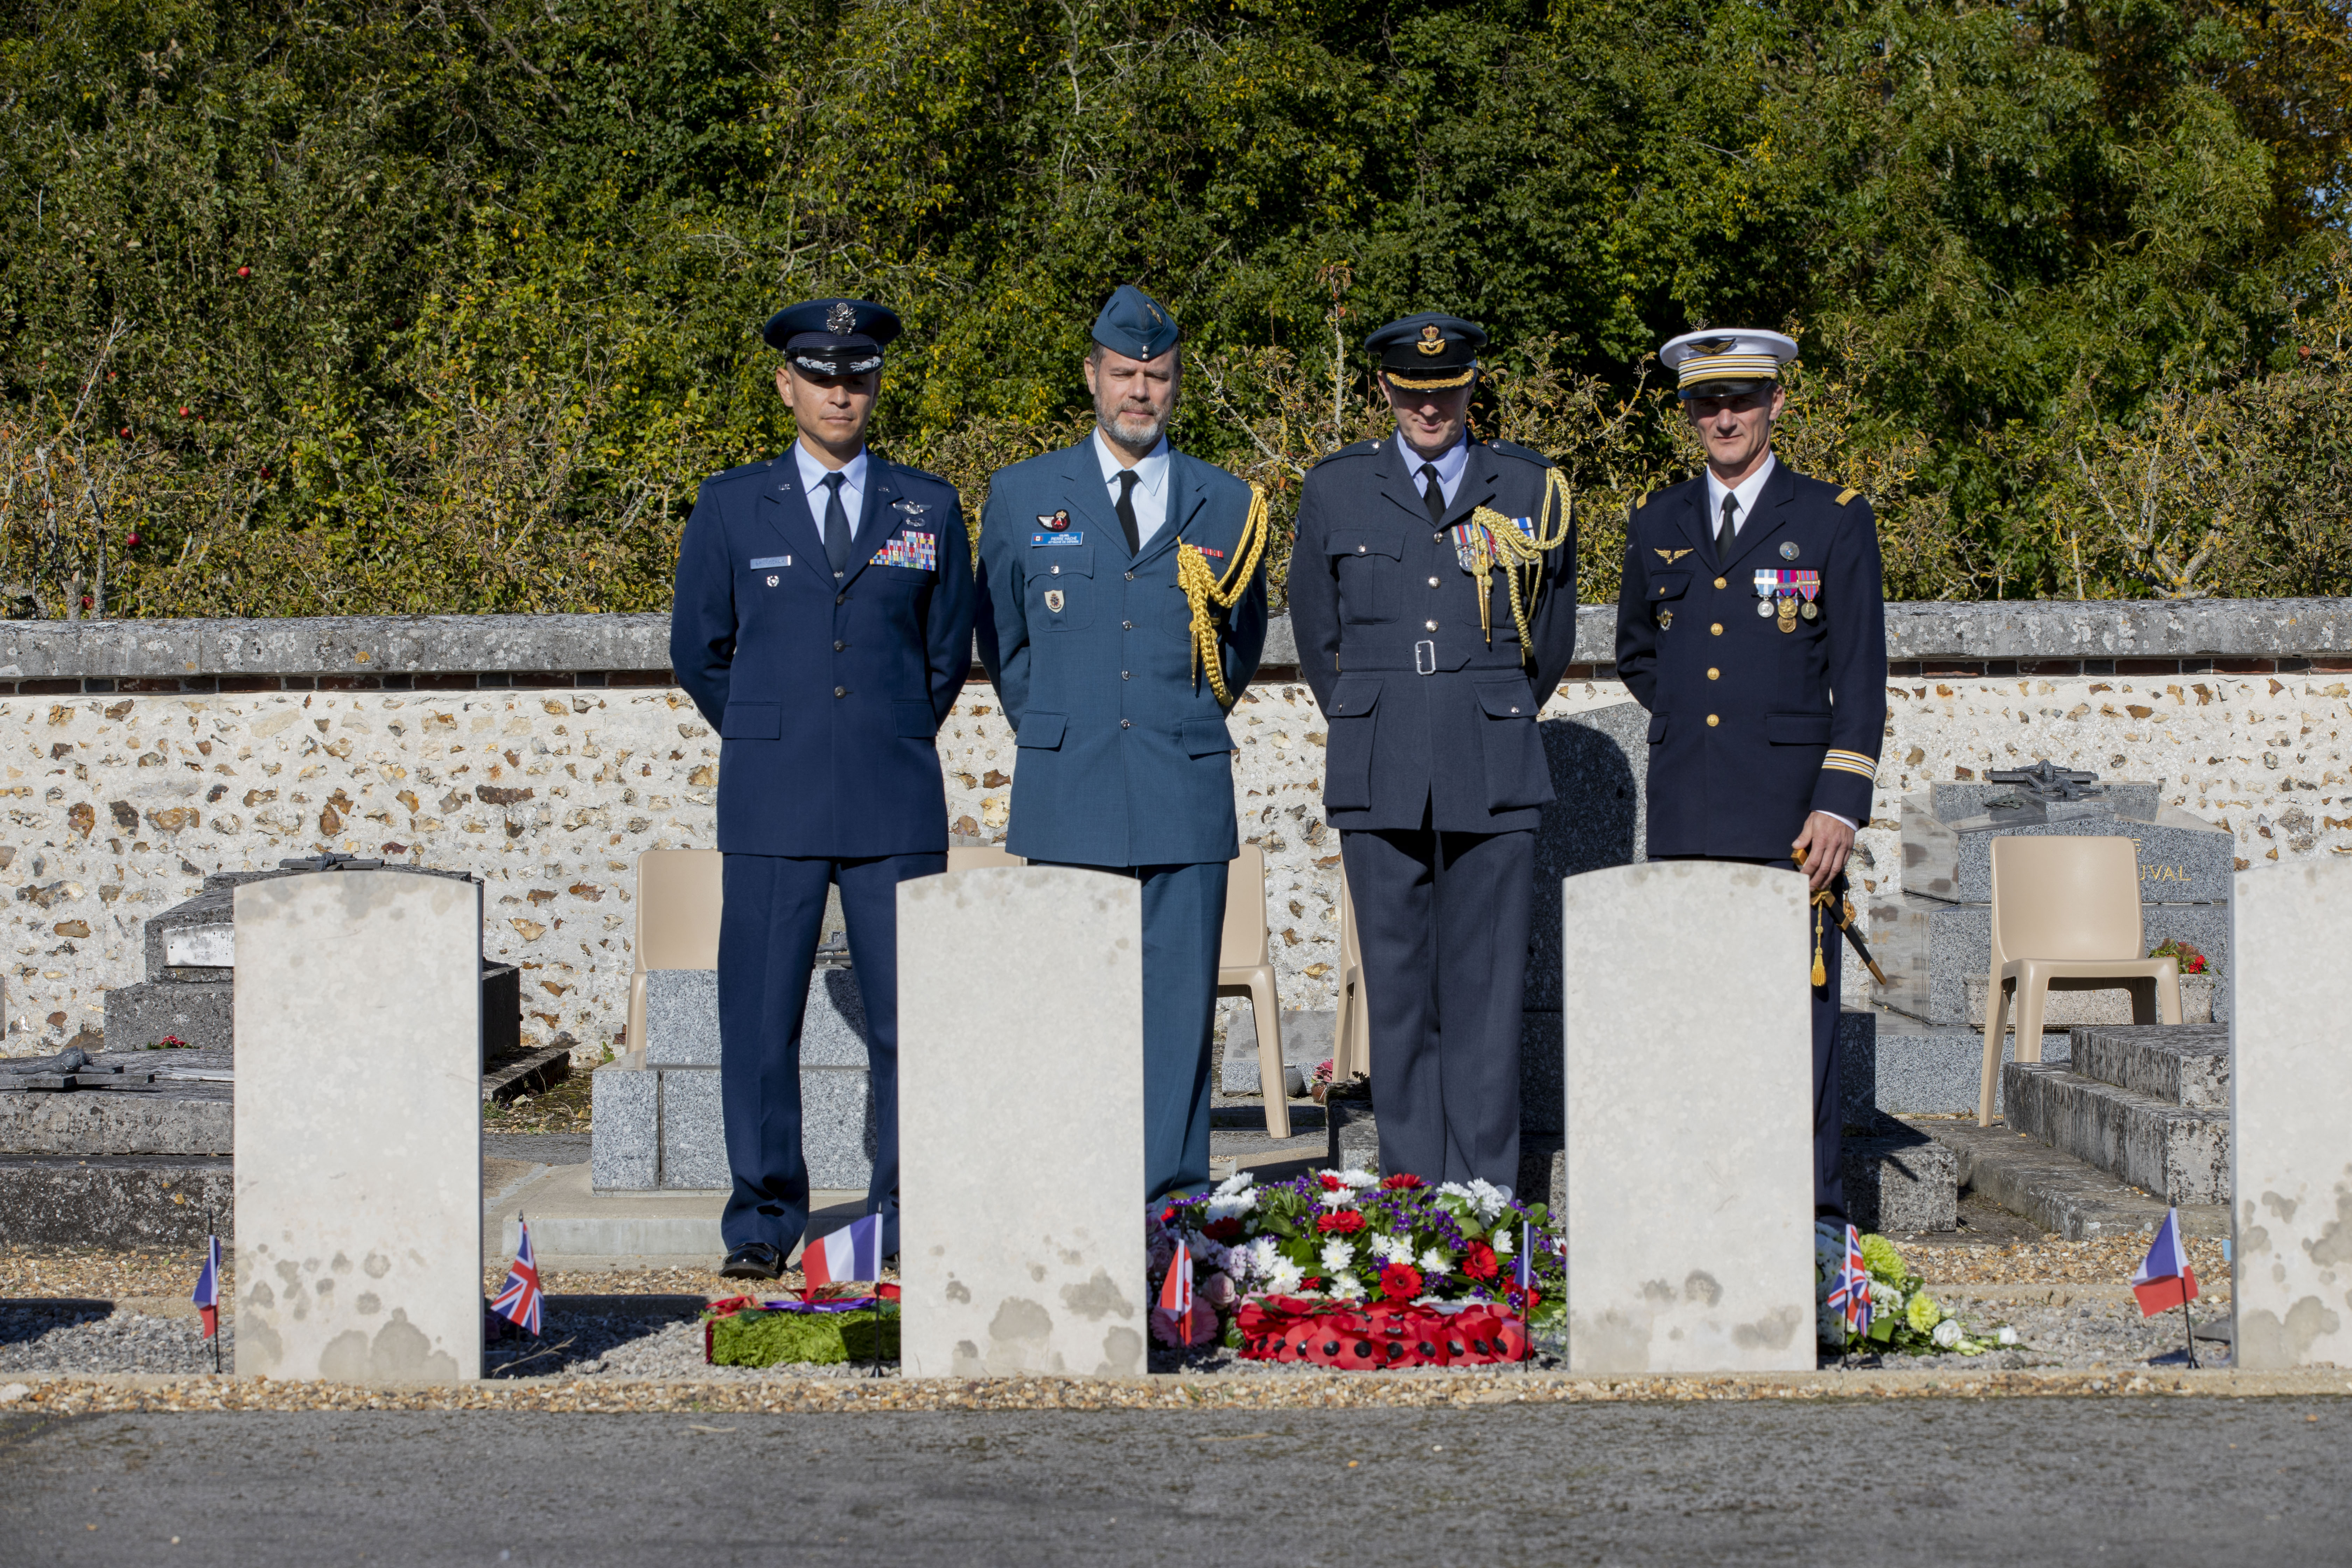 Personnel stand by headstones.